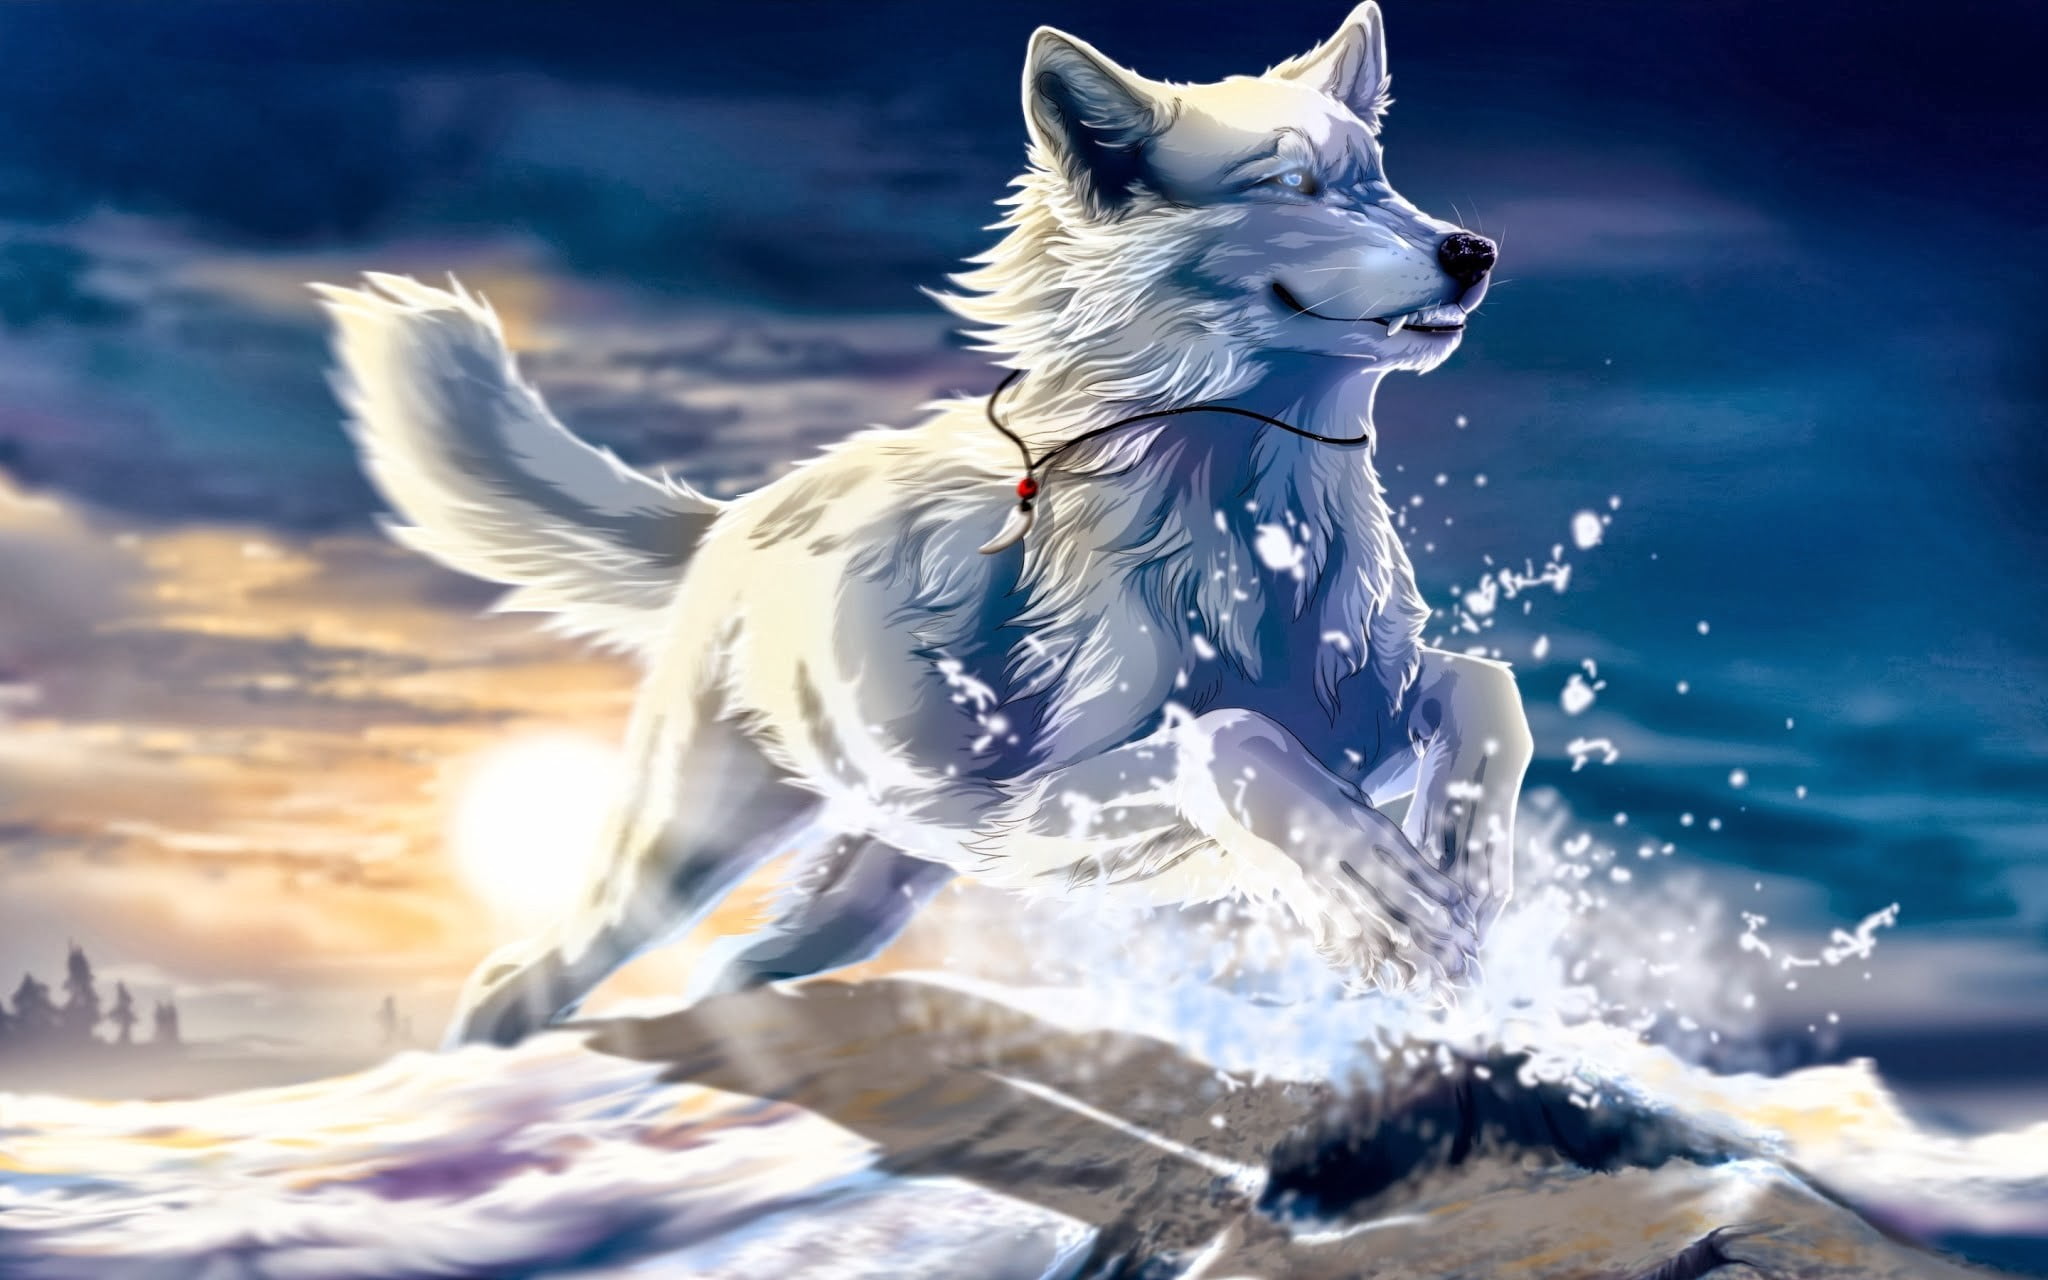 Download wallpapers wolf, painted wolf, neon wolf, wolf art for desktop  with resolution 2560x1600. High Quality HD pictures wallpapers